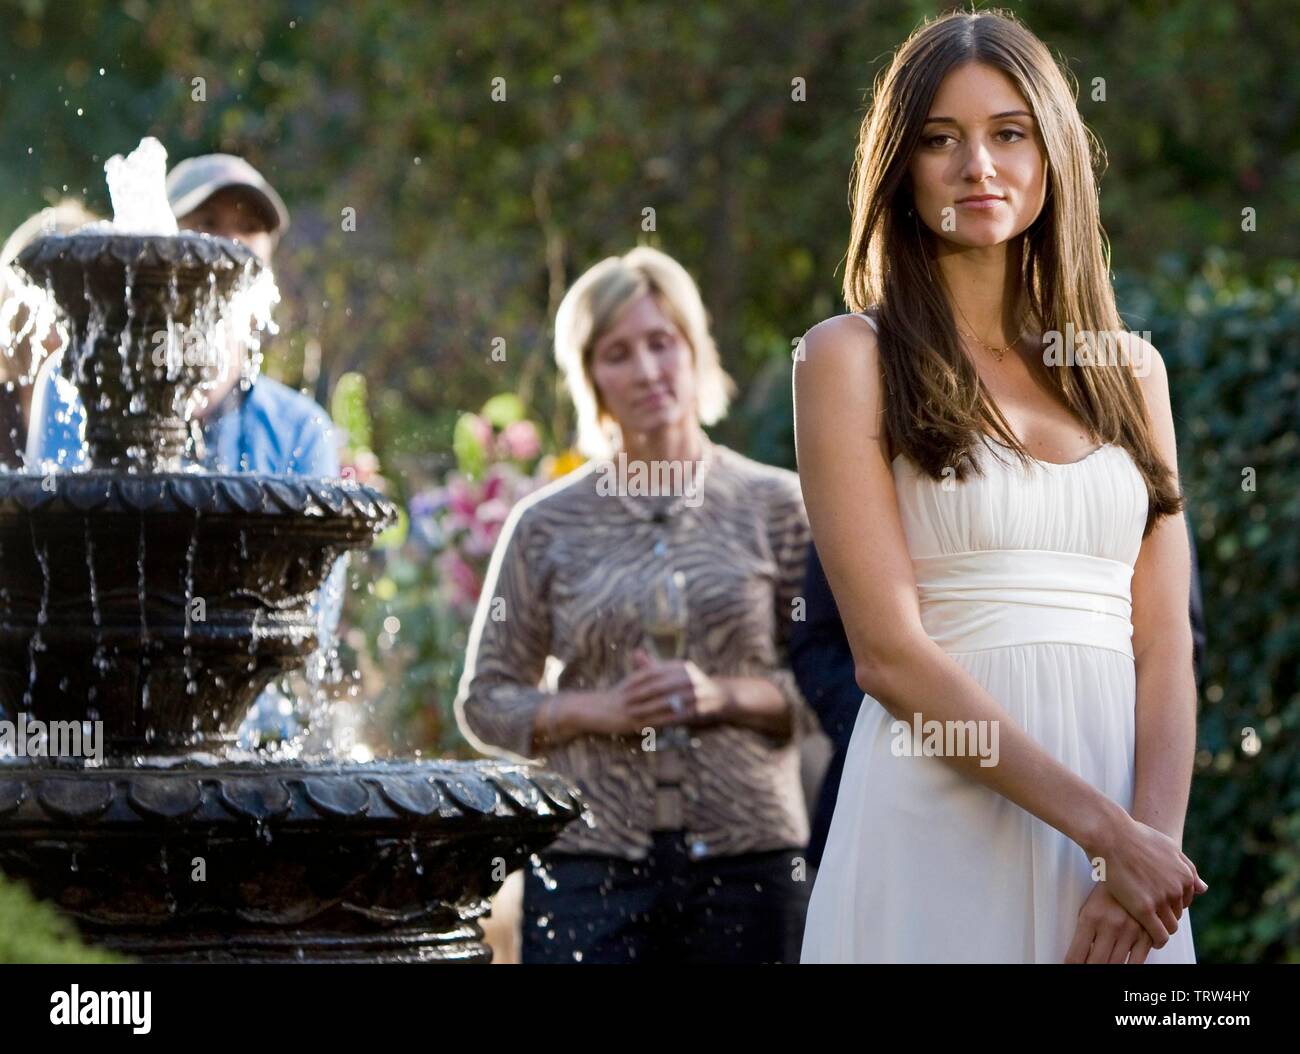 CAROLINE D'AMORE in SORORITY ROW (2009). Copyright: Editorial use only. No merchandising or book covers. This is a publicly distributed handout. Access rights only, no license of copyright provided. Only to be reproduced in conjunction with promotion of this film. Credit: SUMMIT ENTERTAINMENT / DESMOND, MICHAEL / Album Stock Photo